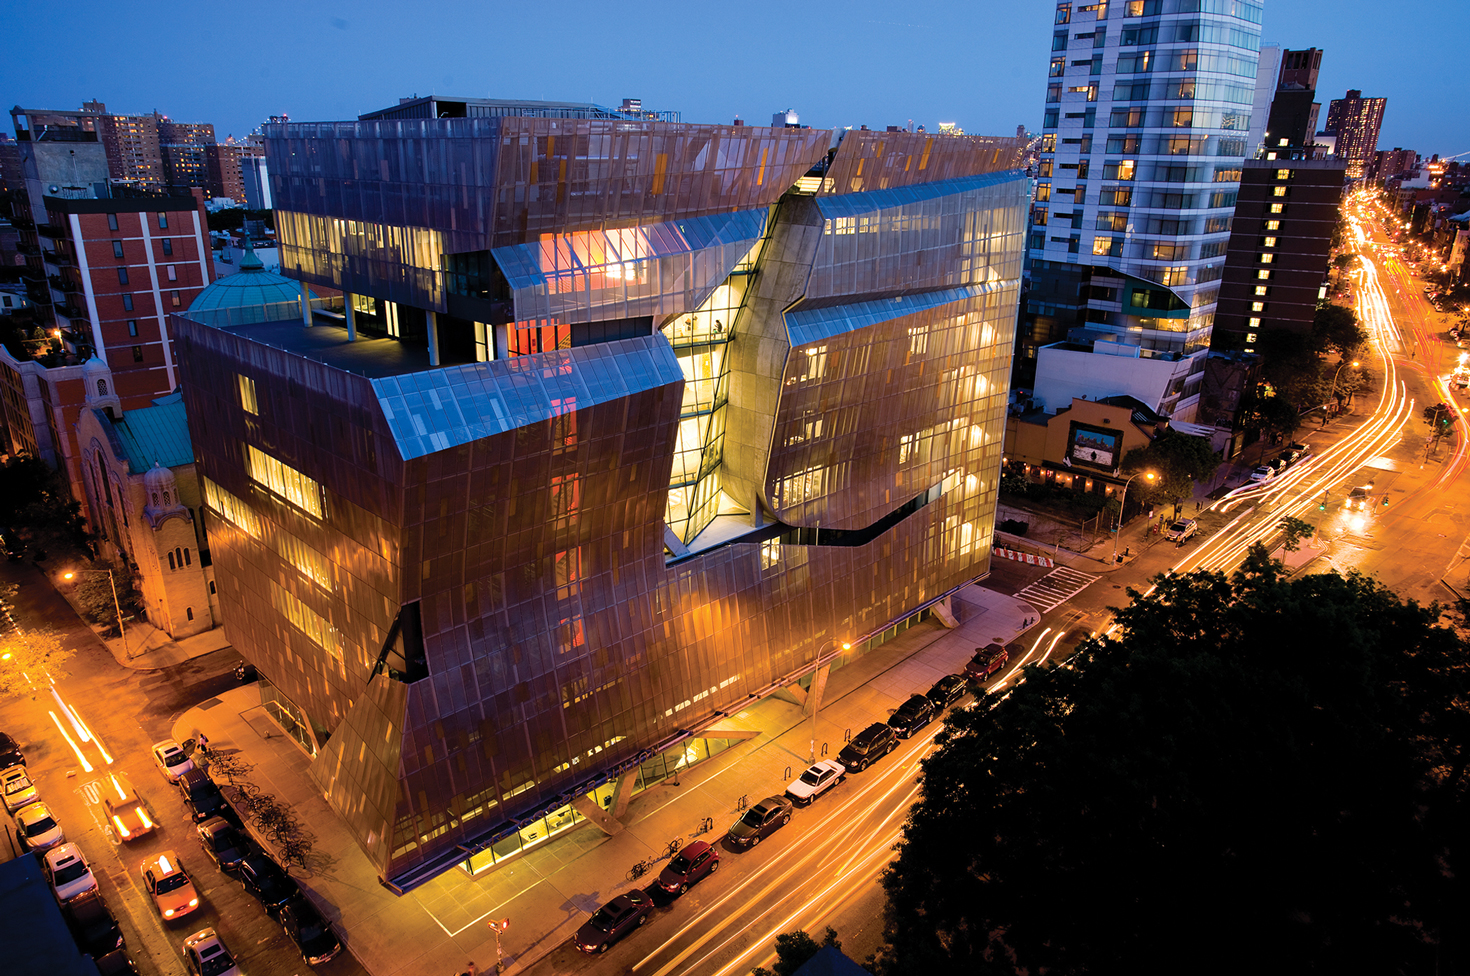 Aerial view of the Cooper Union for the Advancement of Science and Art Building in NYC